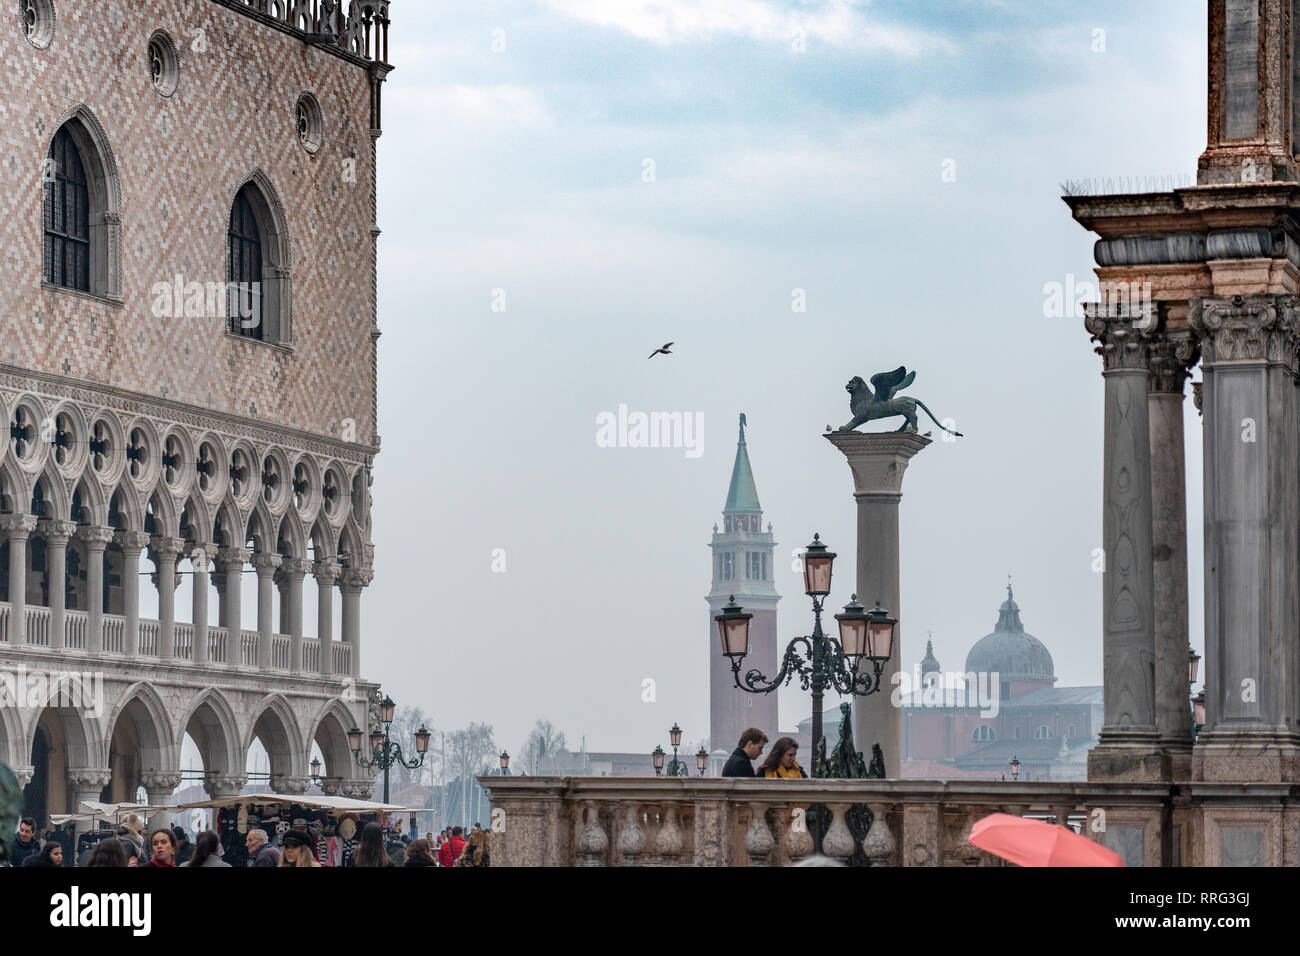 General views of Venice. From a series of travel photos in Italy. Photo date: Sunday, February 10, 2019. Photo: Roger Garfield/Alamy Stock Photo